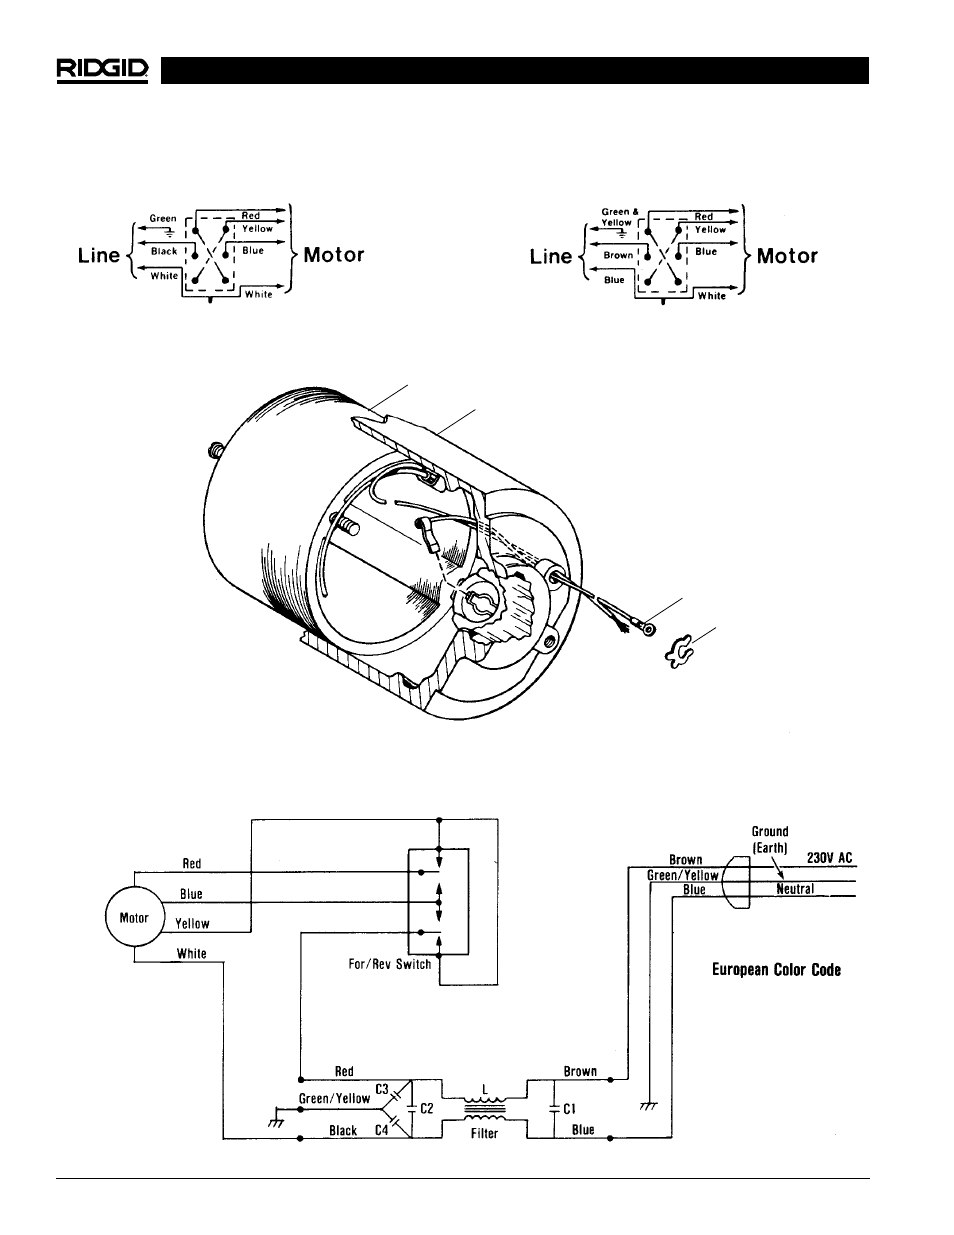 Installation of brush lead wires, Wiring schematic (230v) - with line